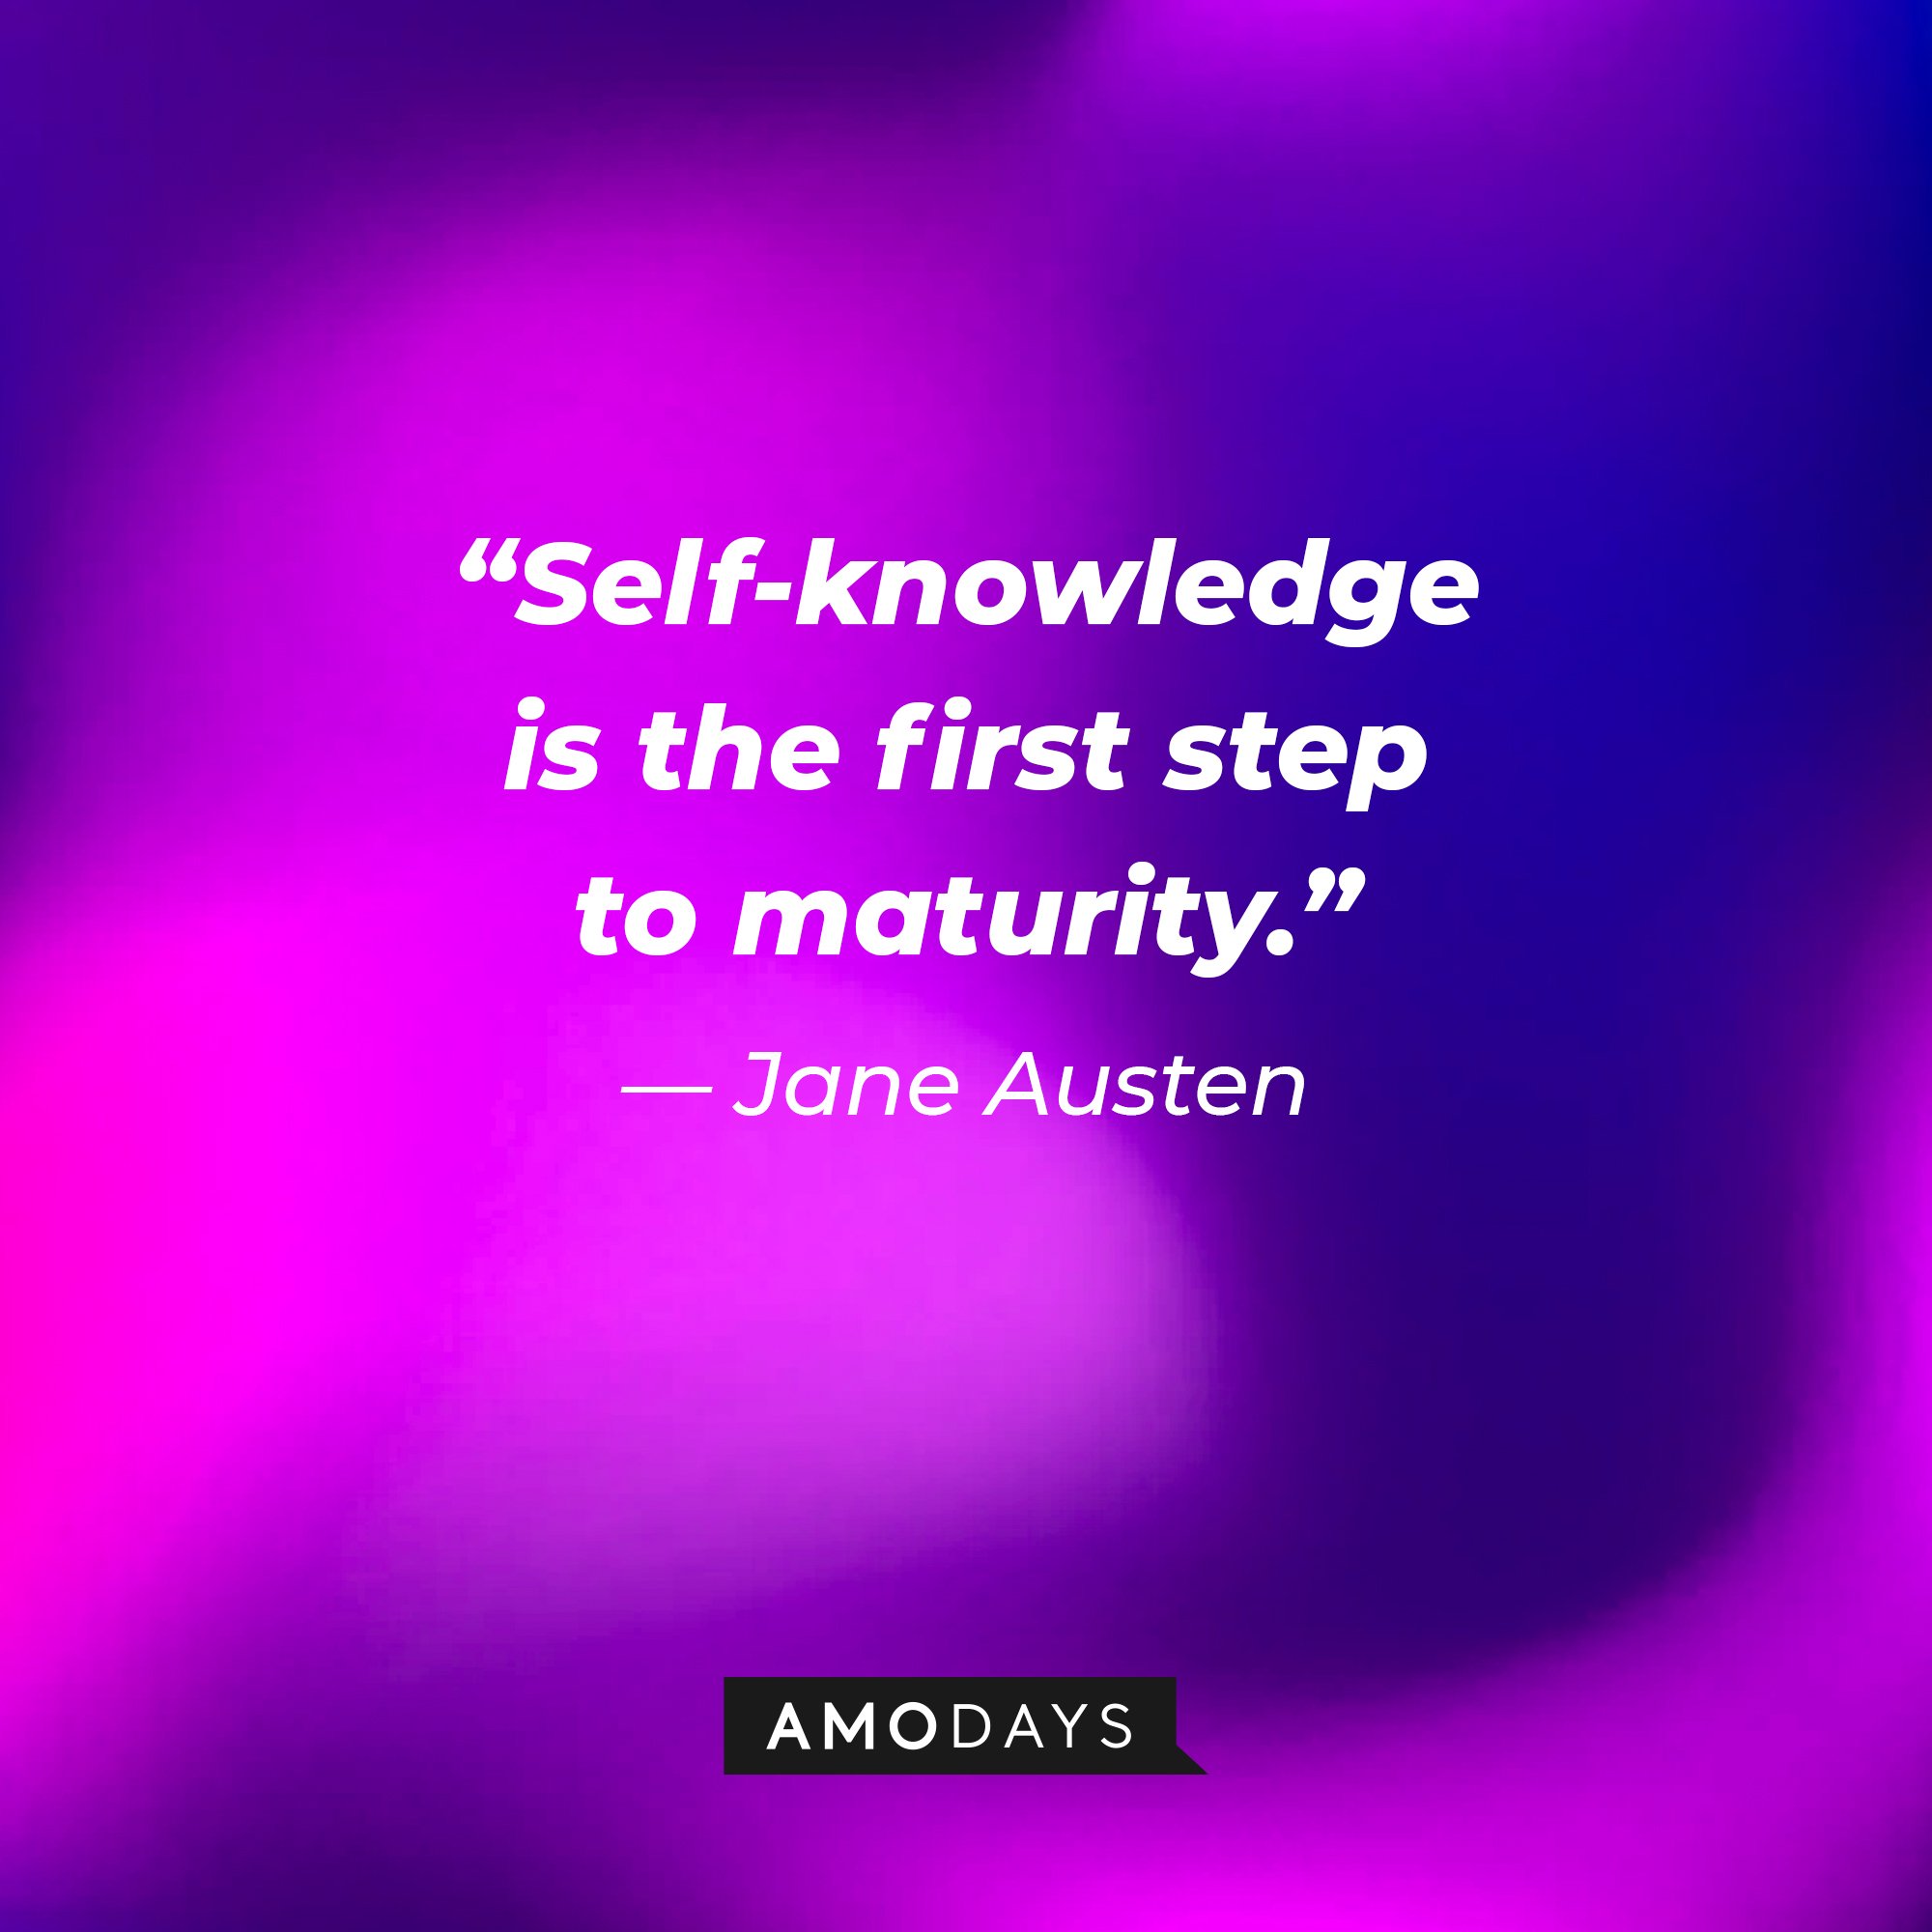 Jane Austen's quote: “Self-knowledge is the first step to maturity.” | Image: AmoDays